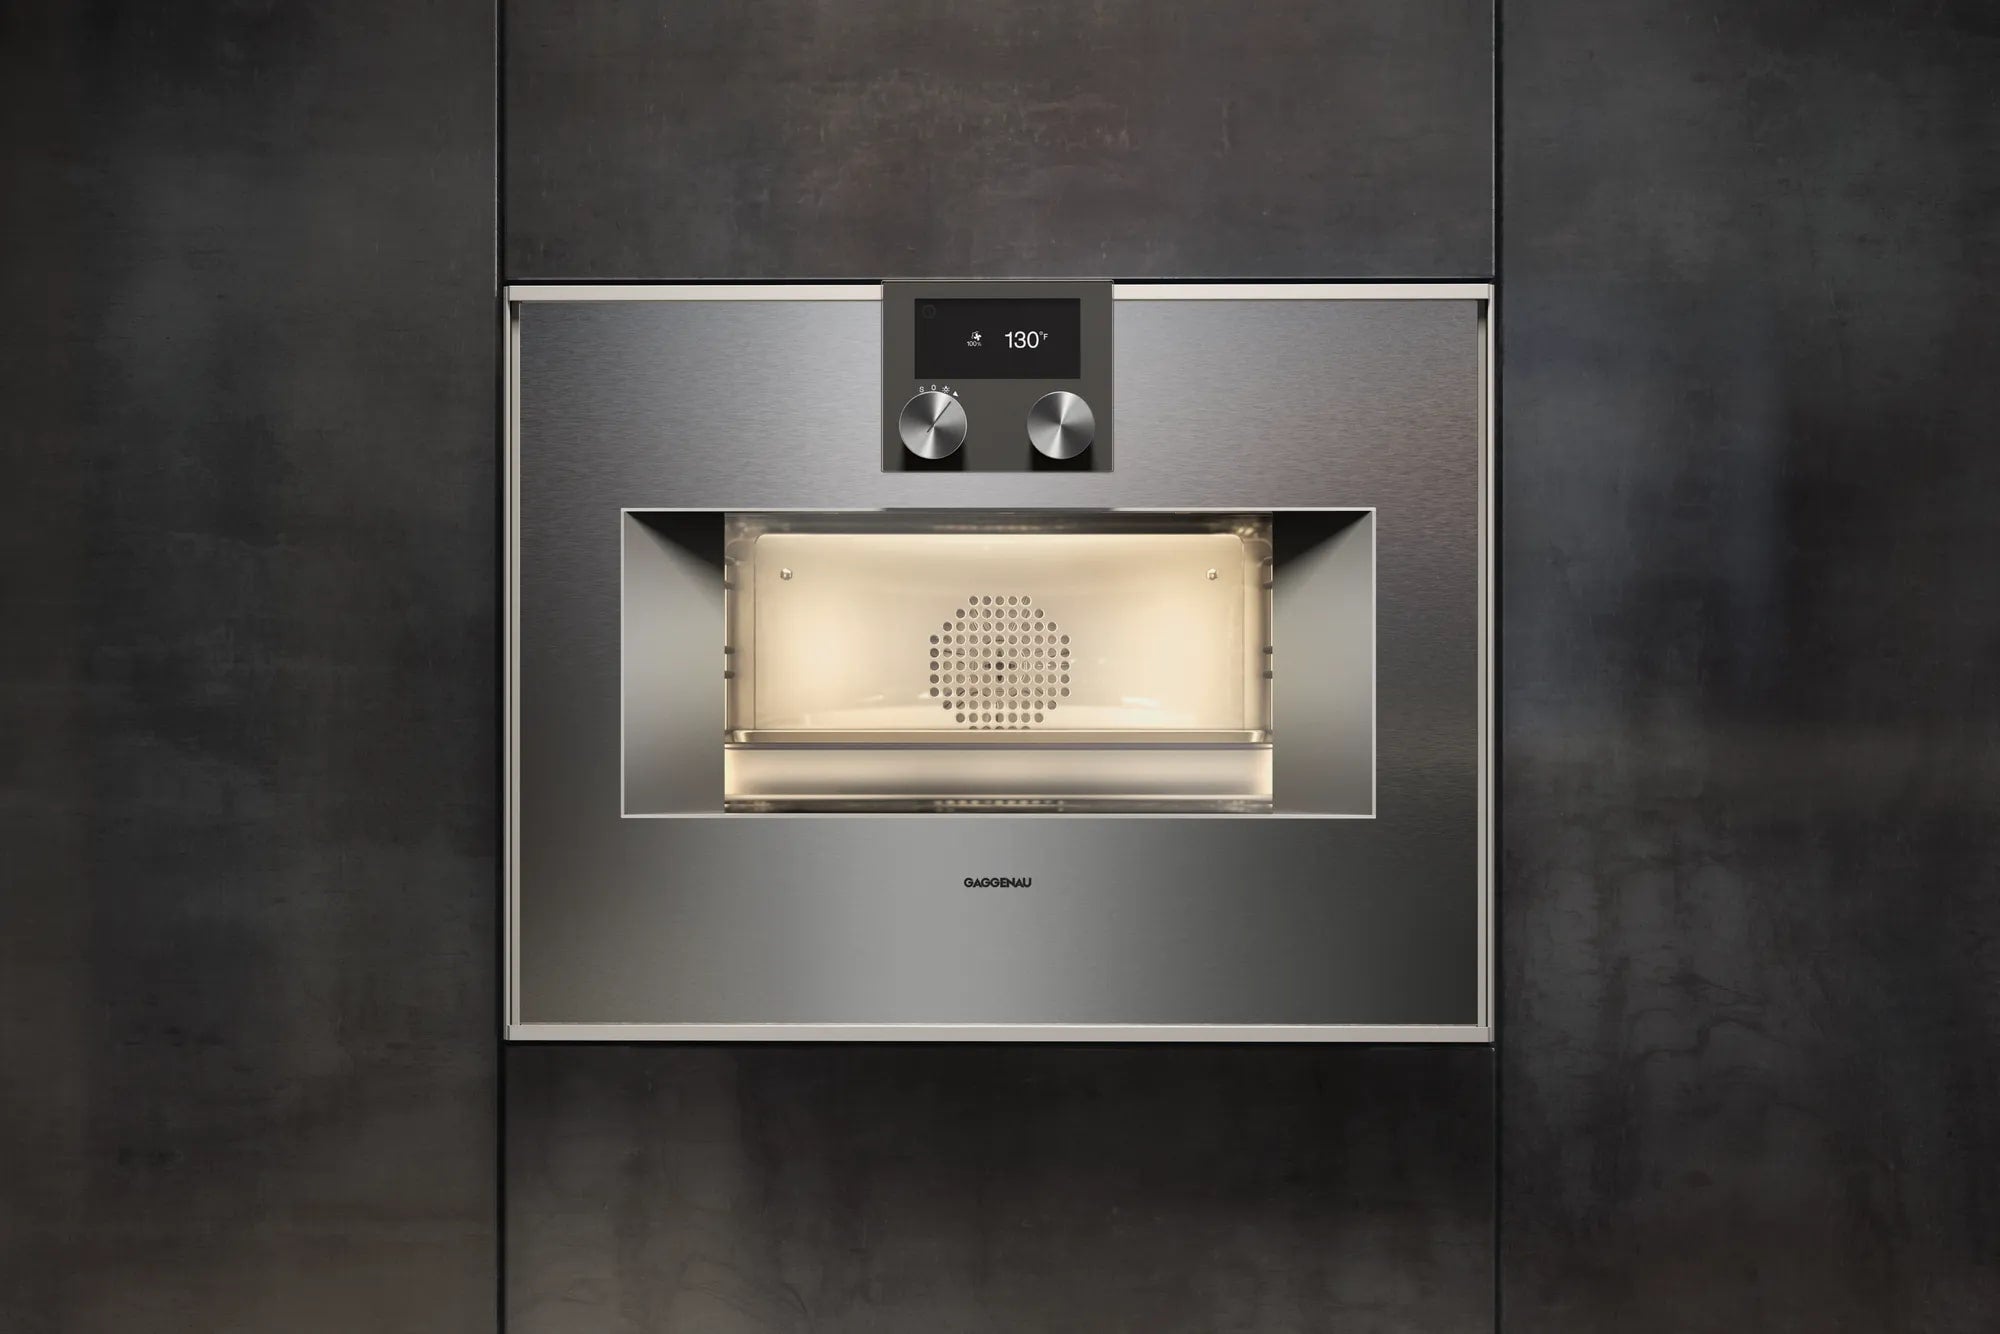 Gaggenau - 2.1 cu. ft Steam Wall Oven in Stainless - BS470612